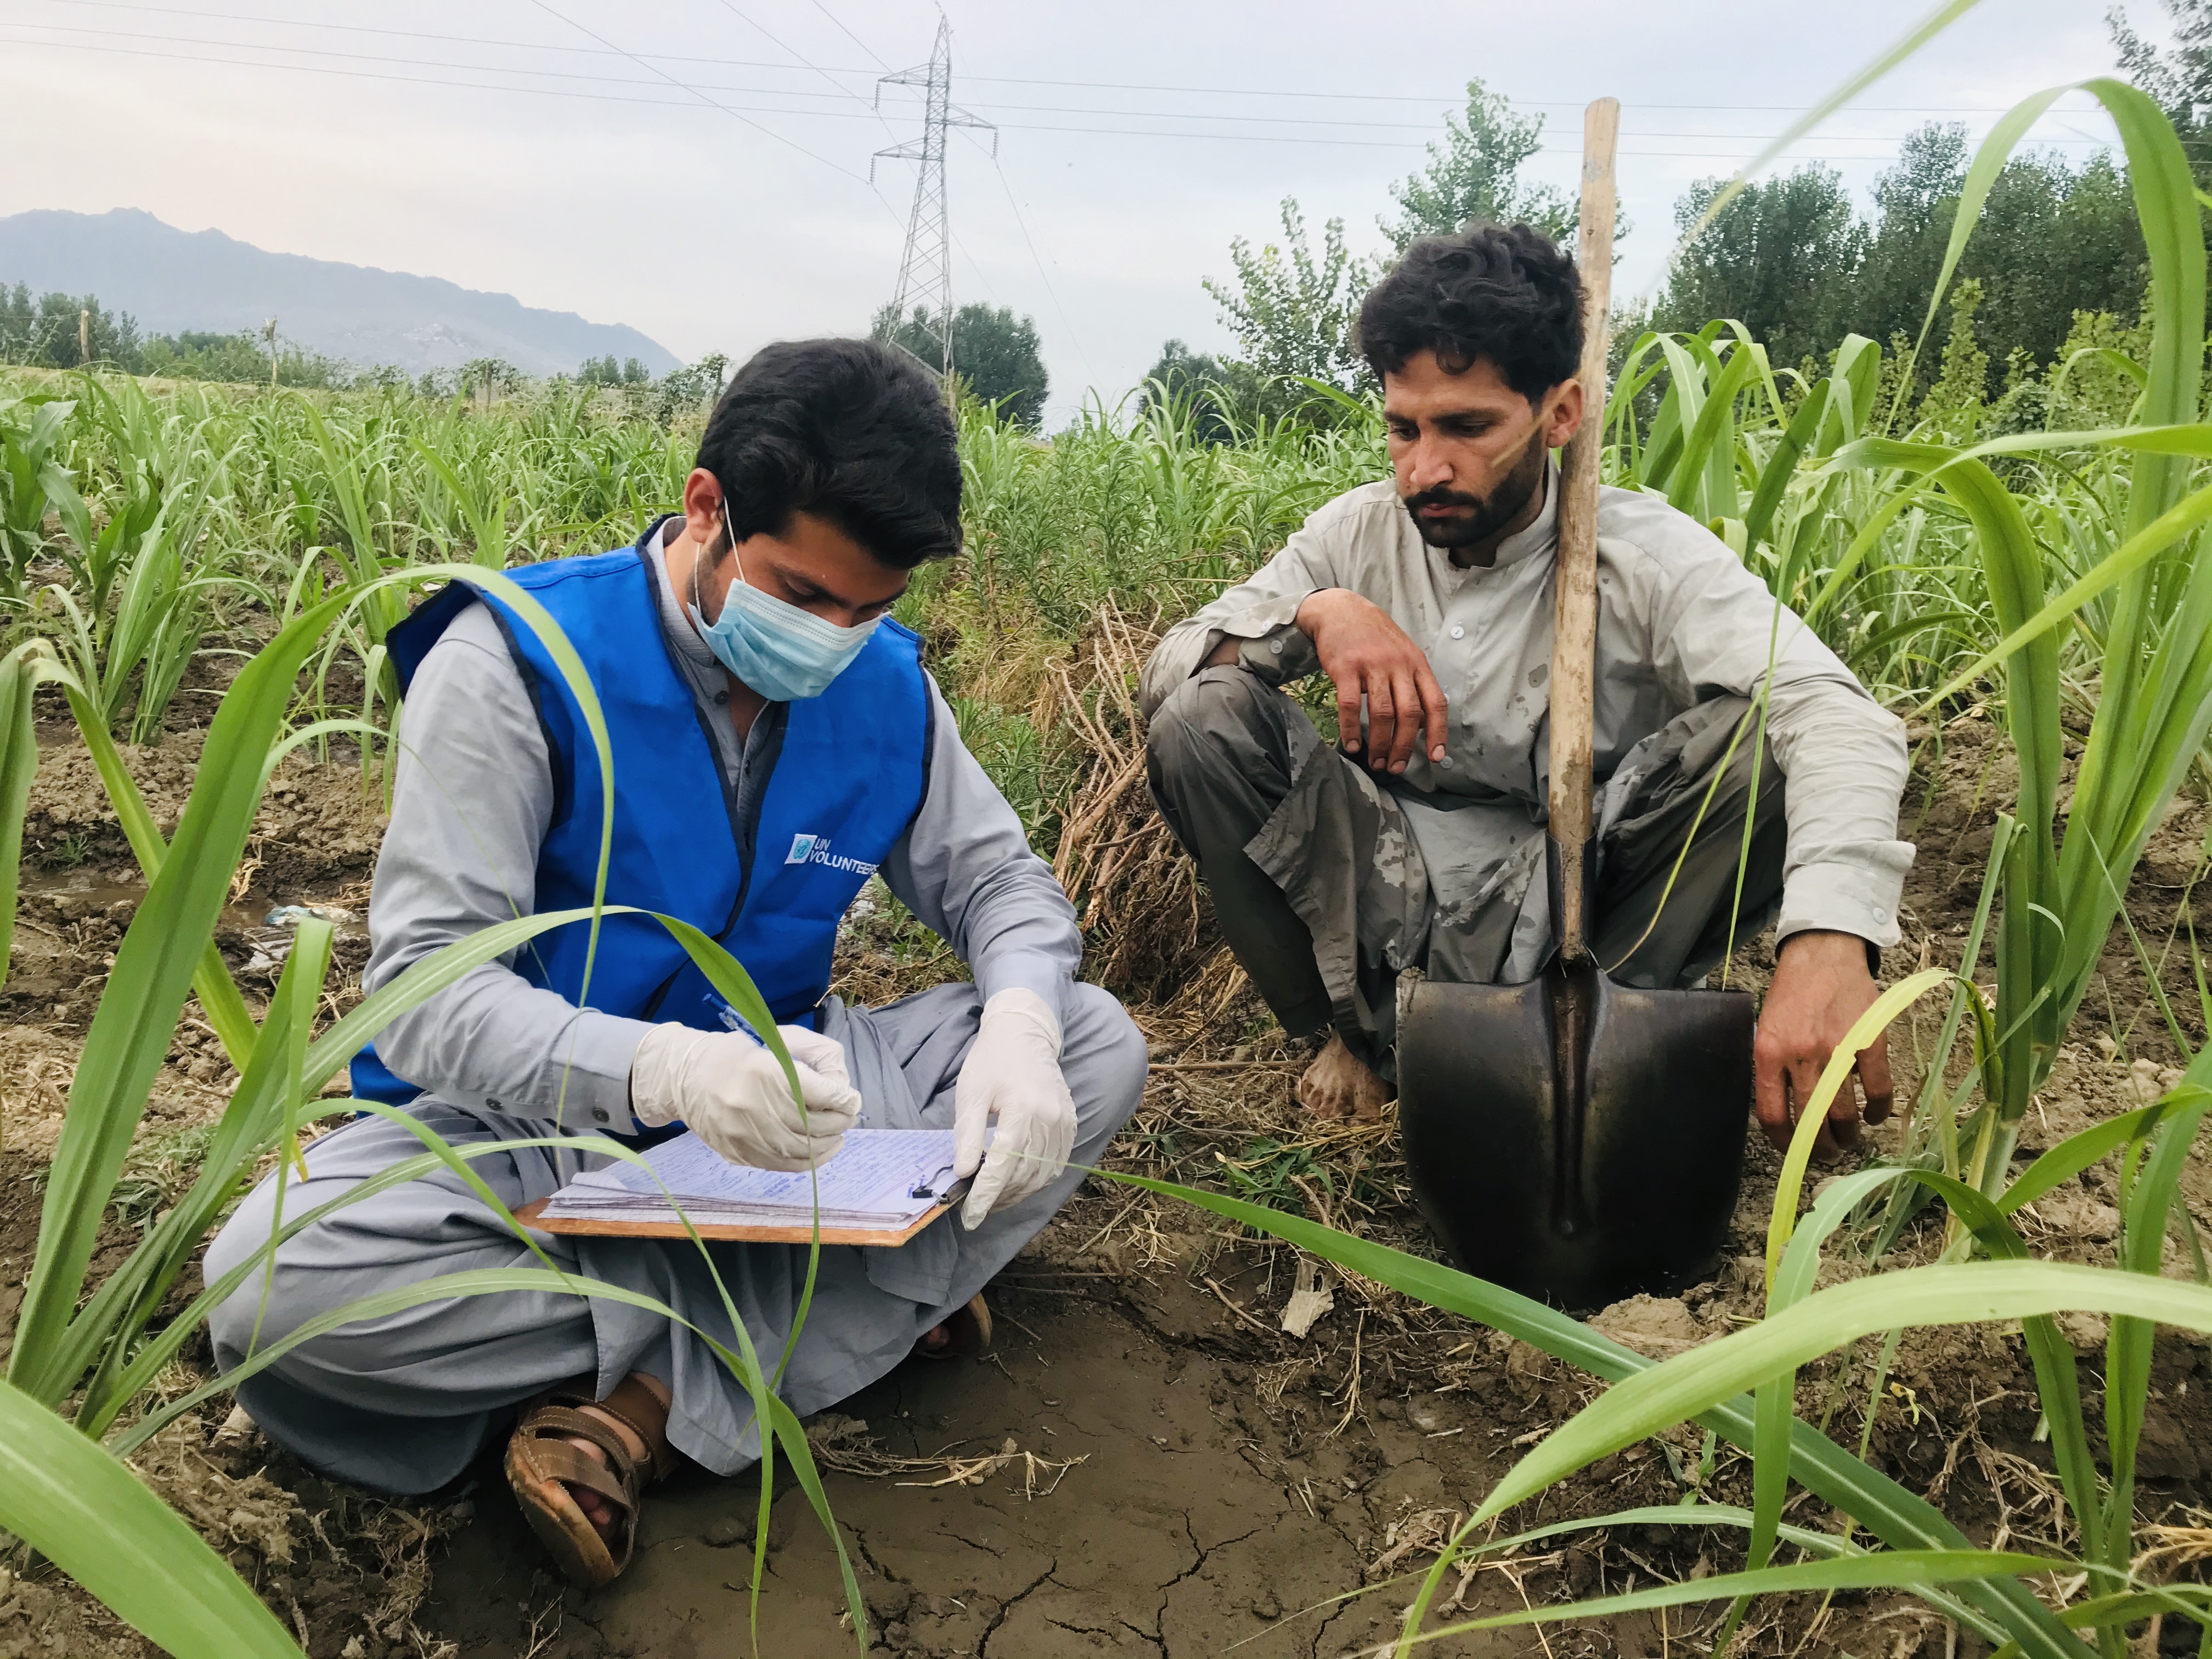 Fawad Arshad (left), former national University UN Volunteer, served with UNDP in Pakistan to promote civic and voter education in rural communities to strengthen the engagement of citizens, particularly women and youth, in electoral processes. (UNV, 2020)